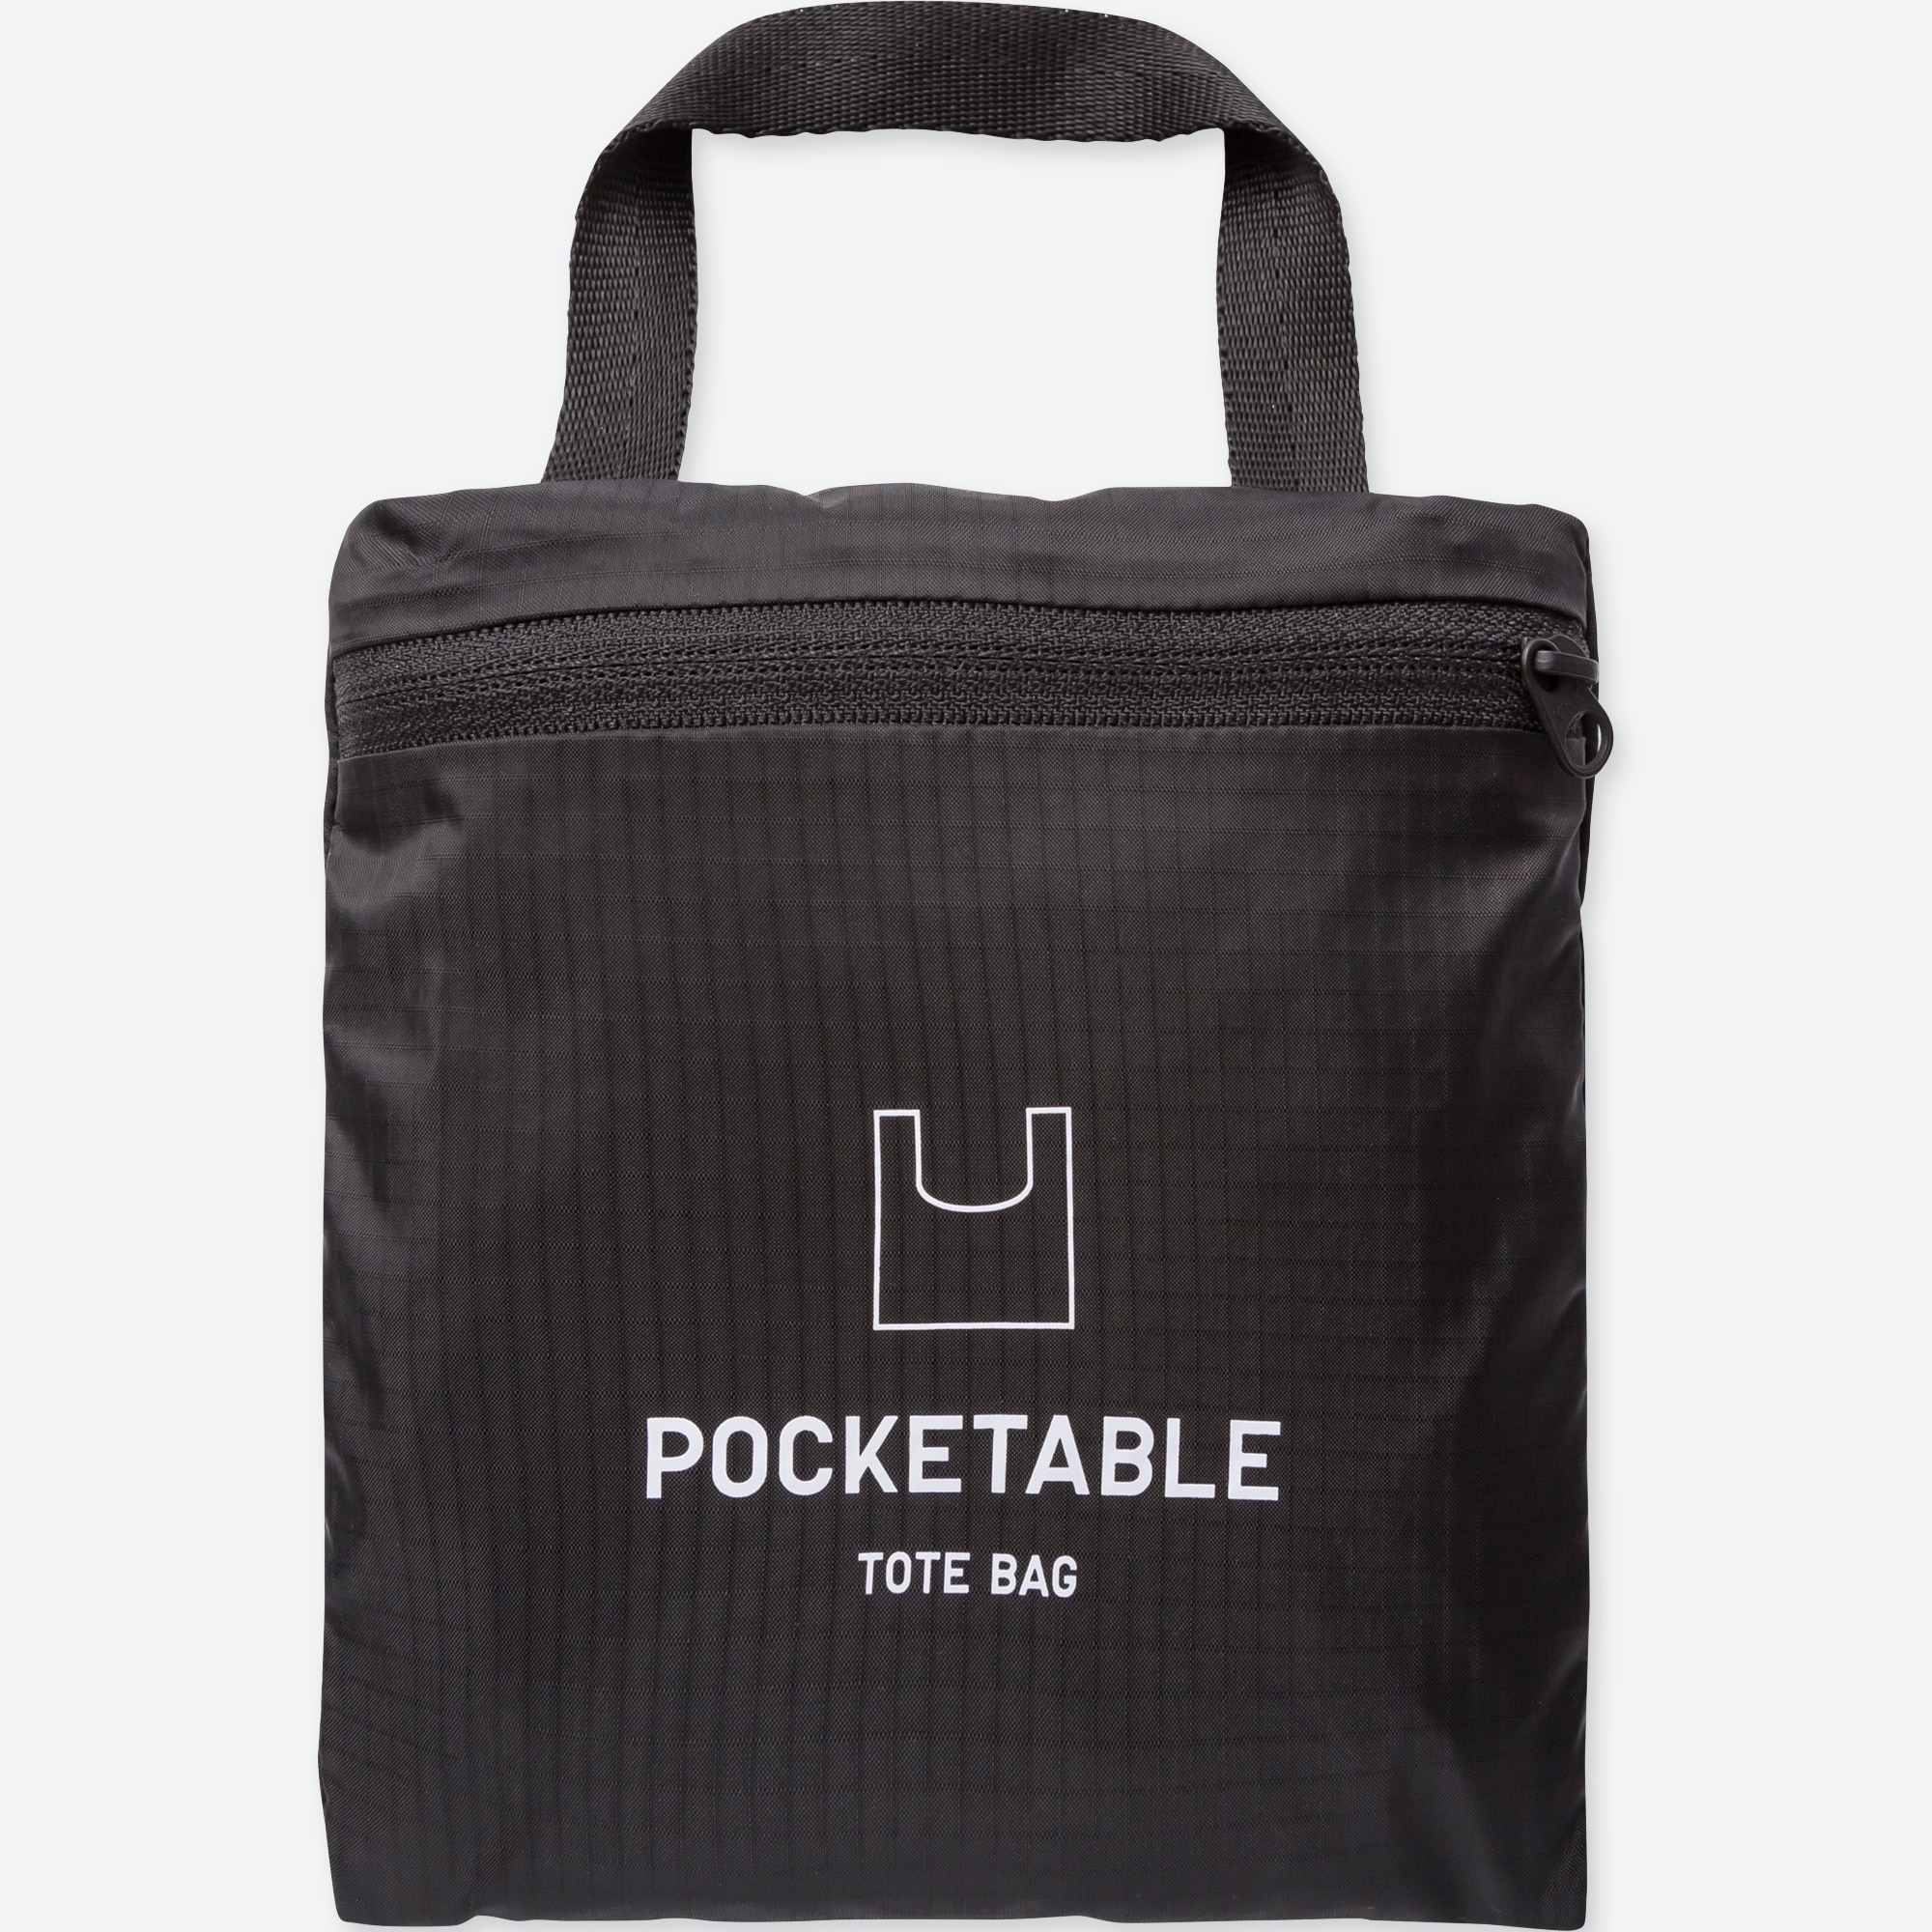 packable tote bag for travel